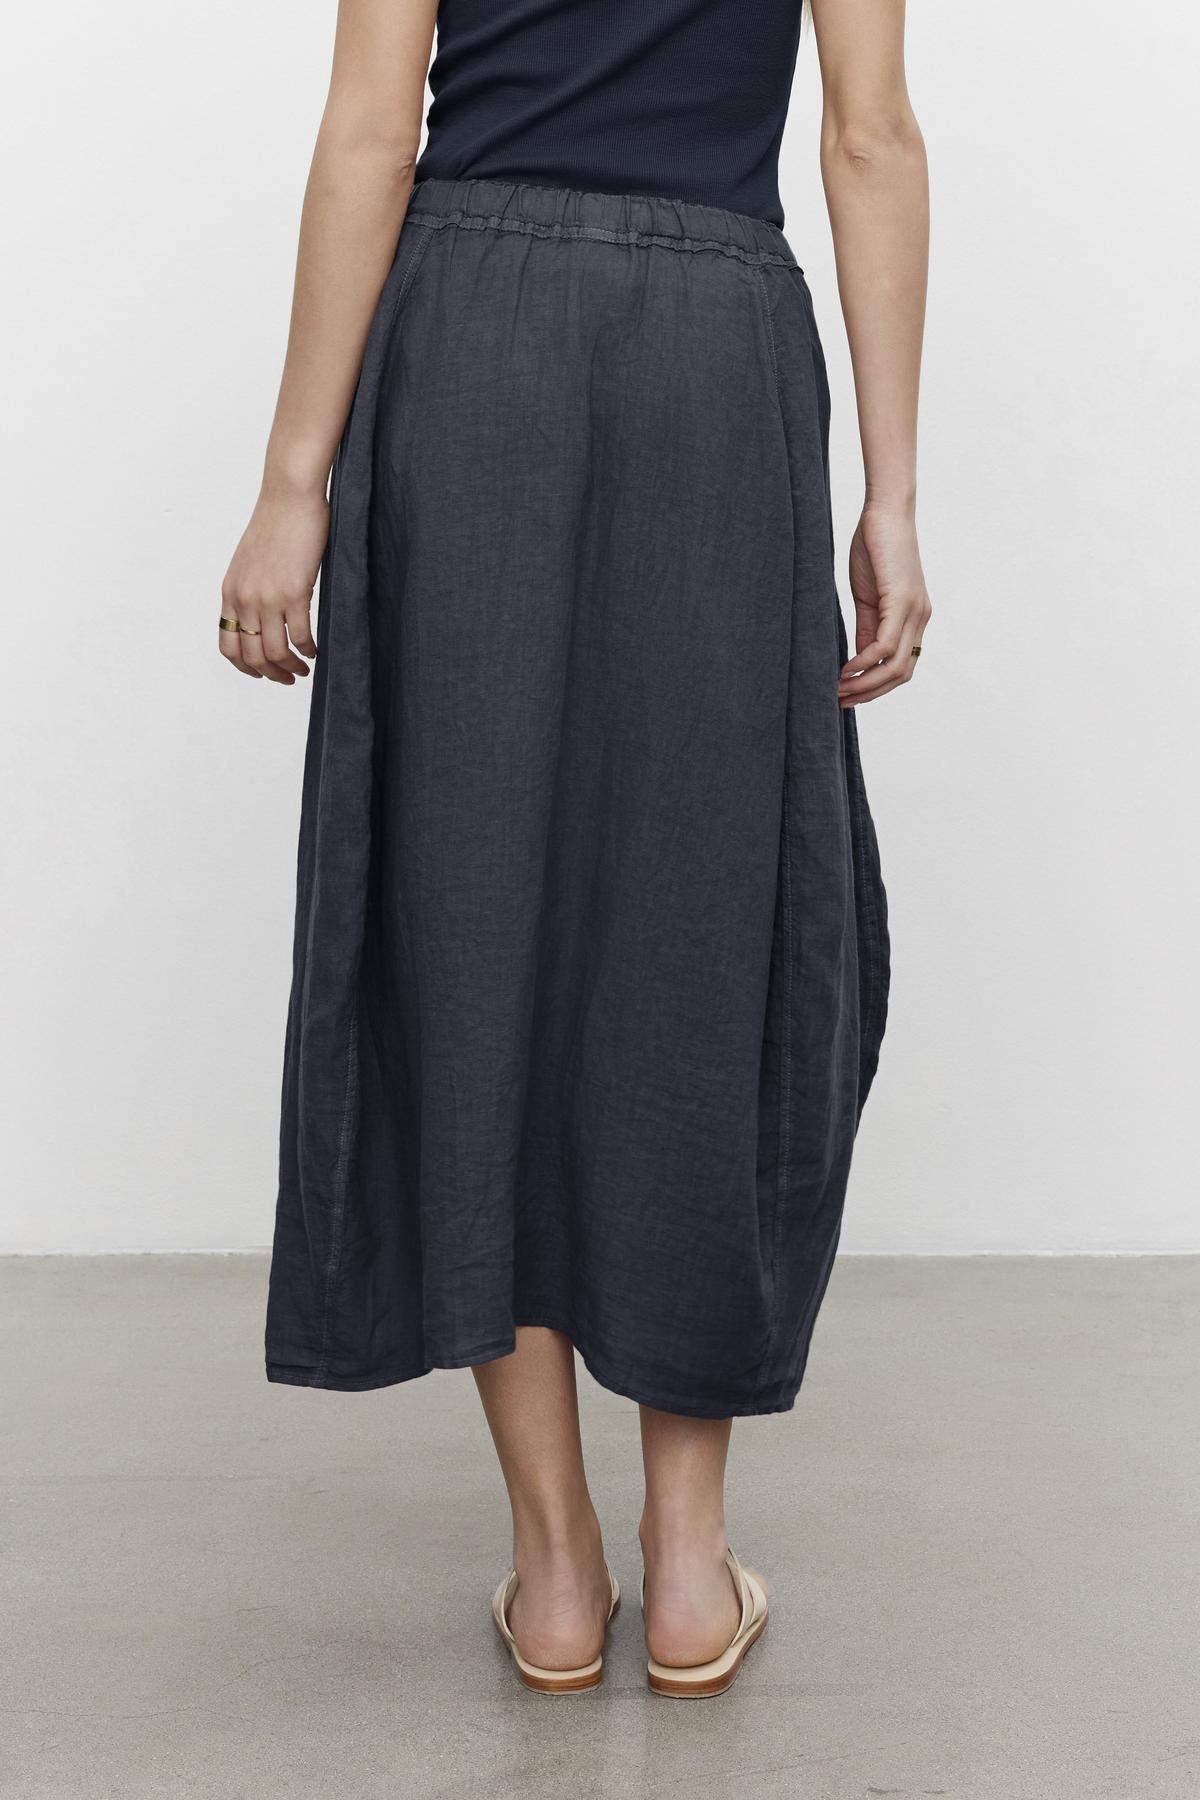 Woman viewed from behind wearing a dark gray FAE LINEN A-LINE SKIRT and light beige shoes, standing against a plain background by Velvet by Graham & Spencer.-36676258103489